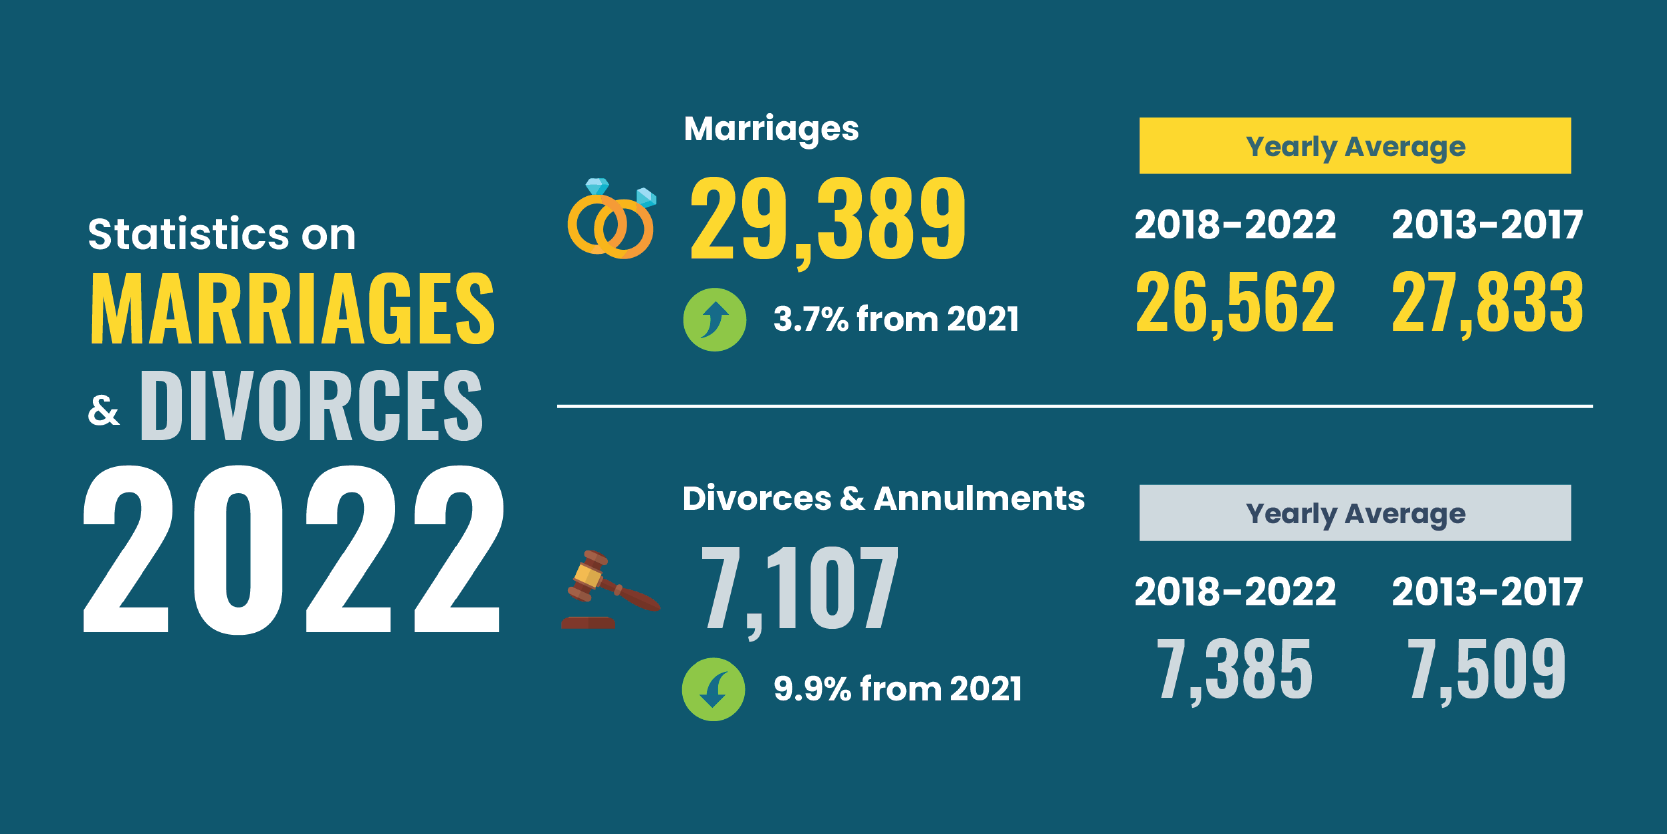 Marriages and Divorces 2022